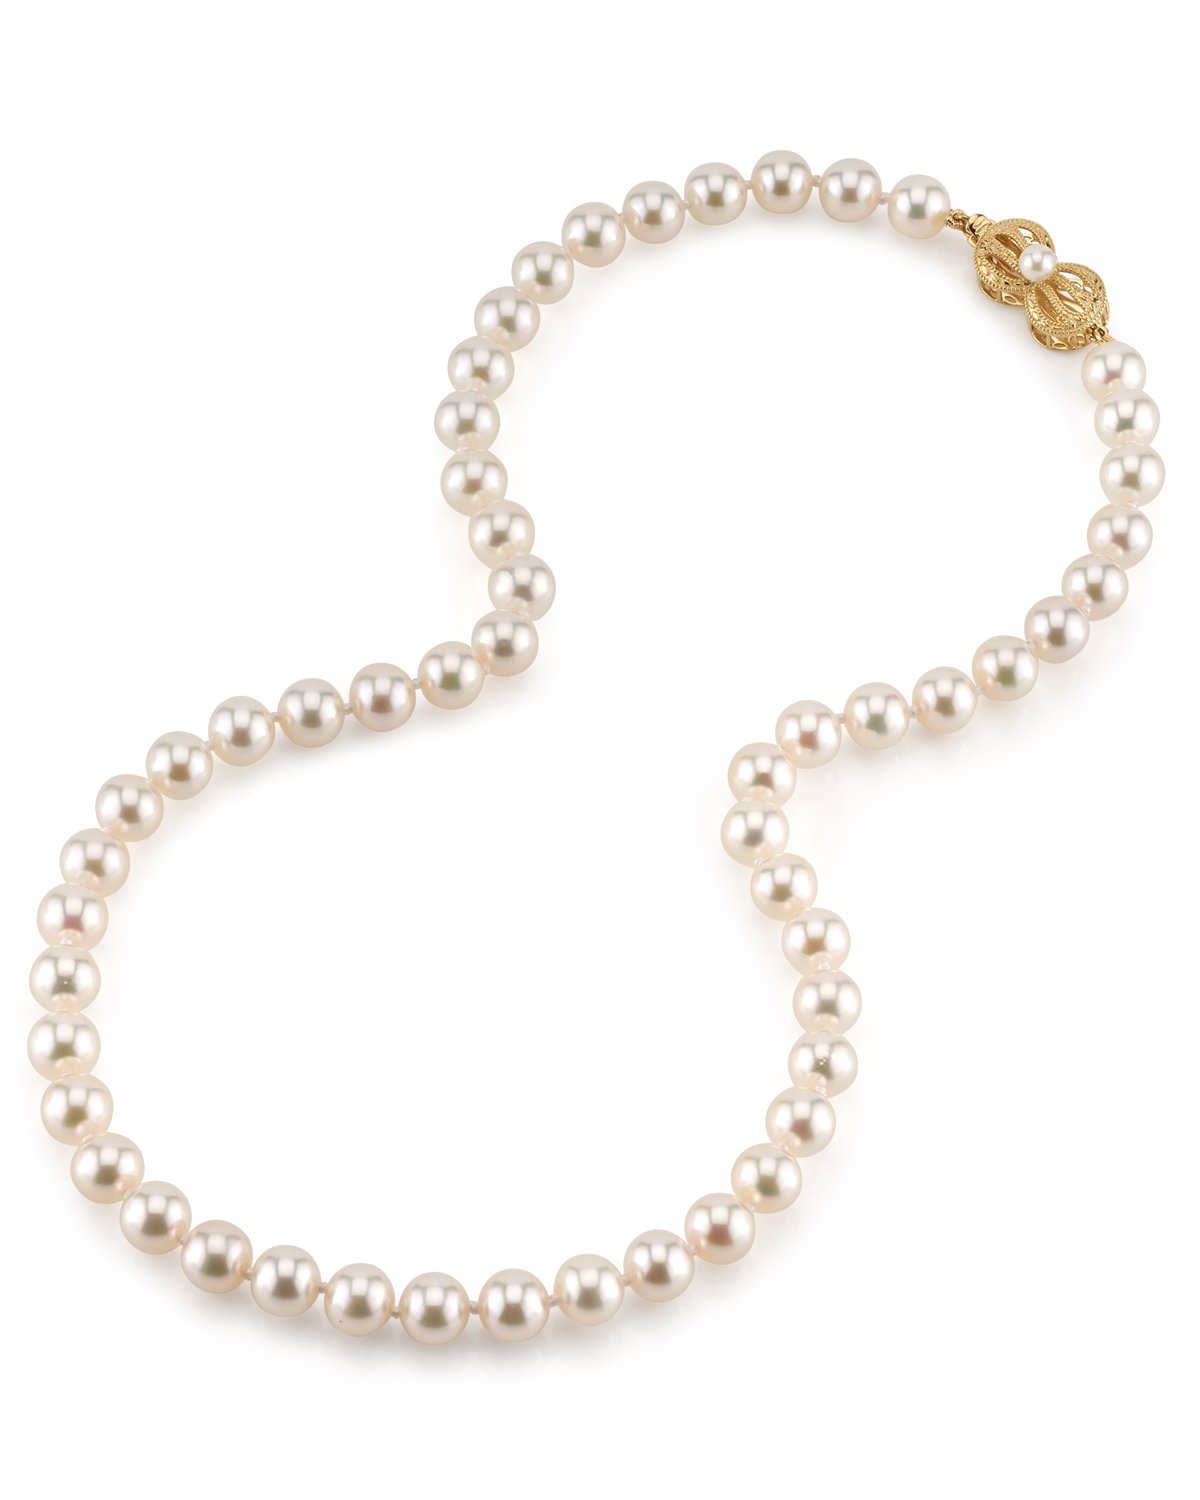 7.5-8.0mm Japanese Akoya White Pearl Necklace- AA+ Quality - Secondary Image